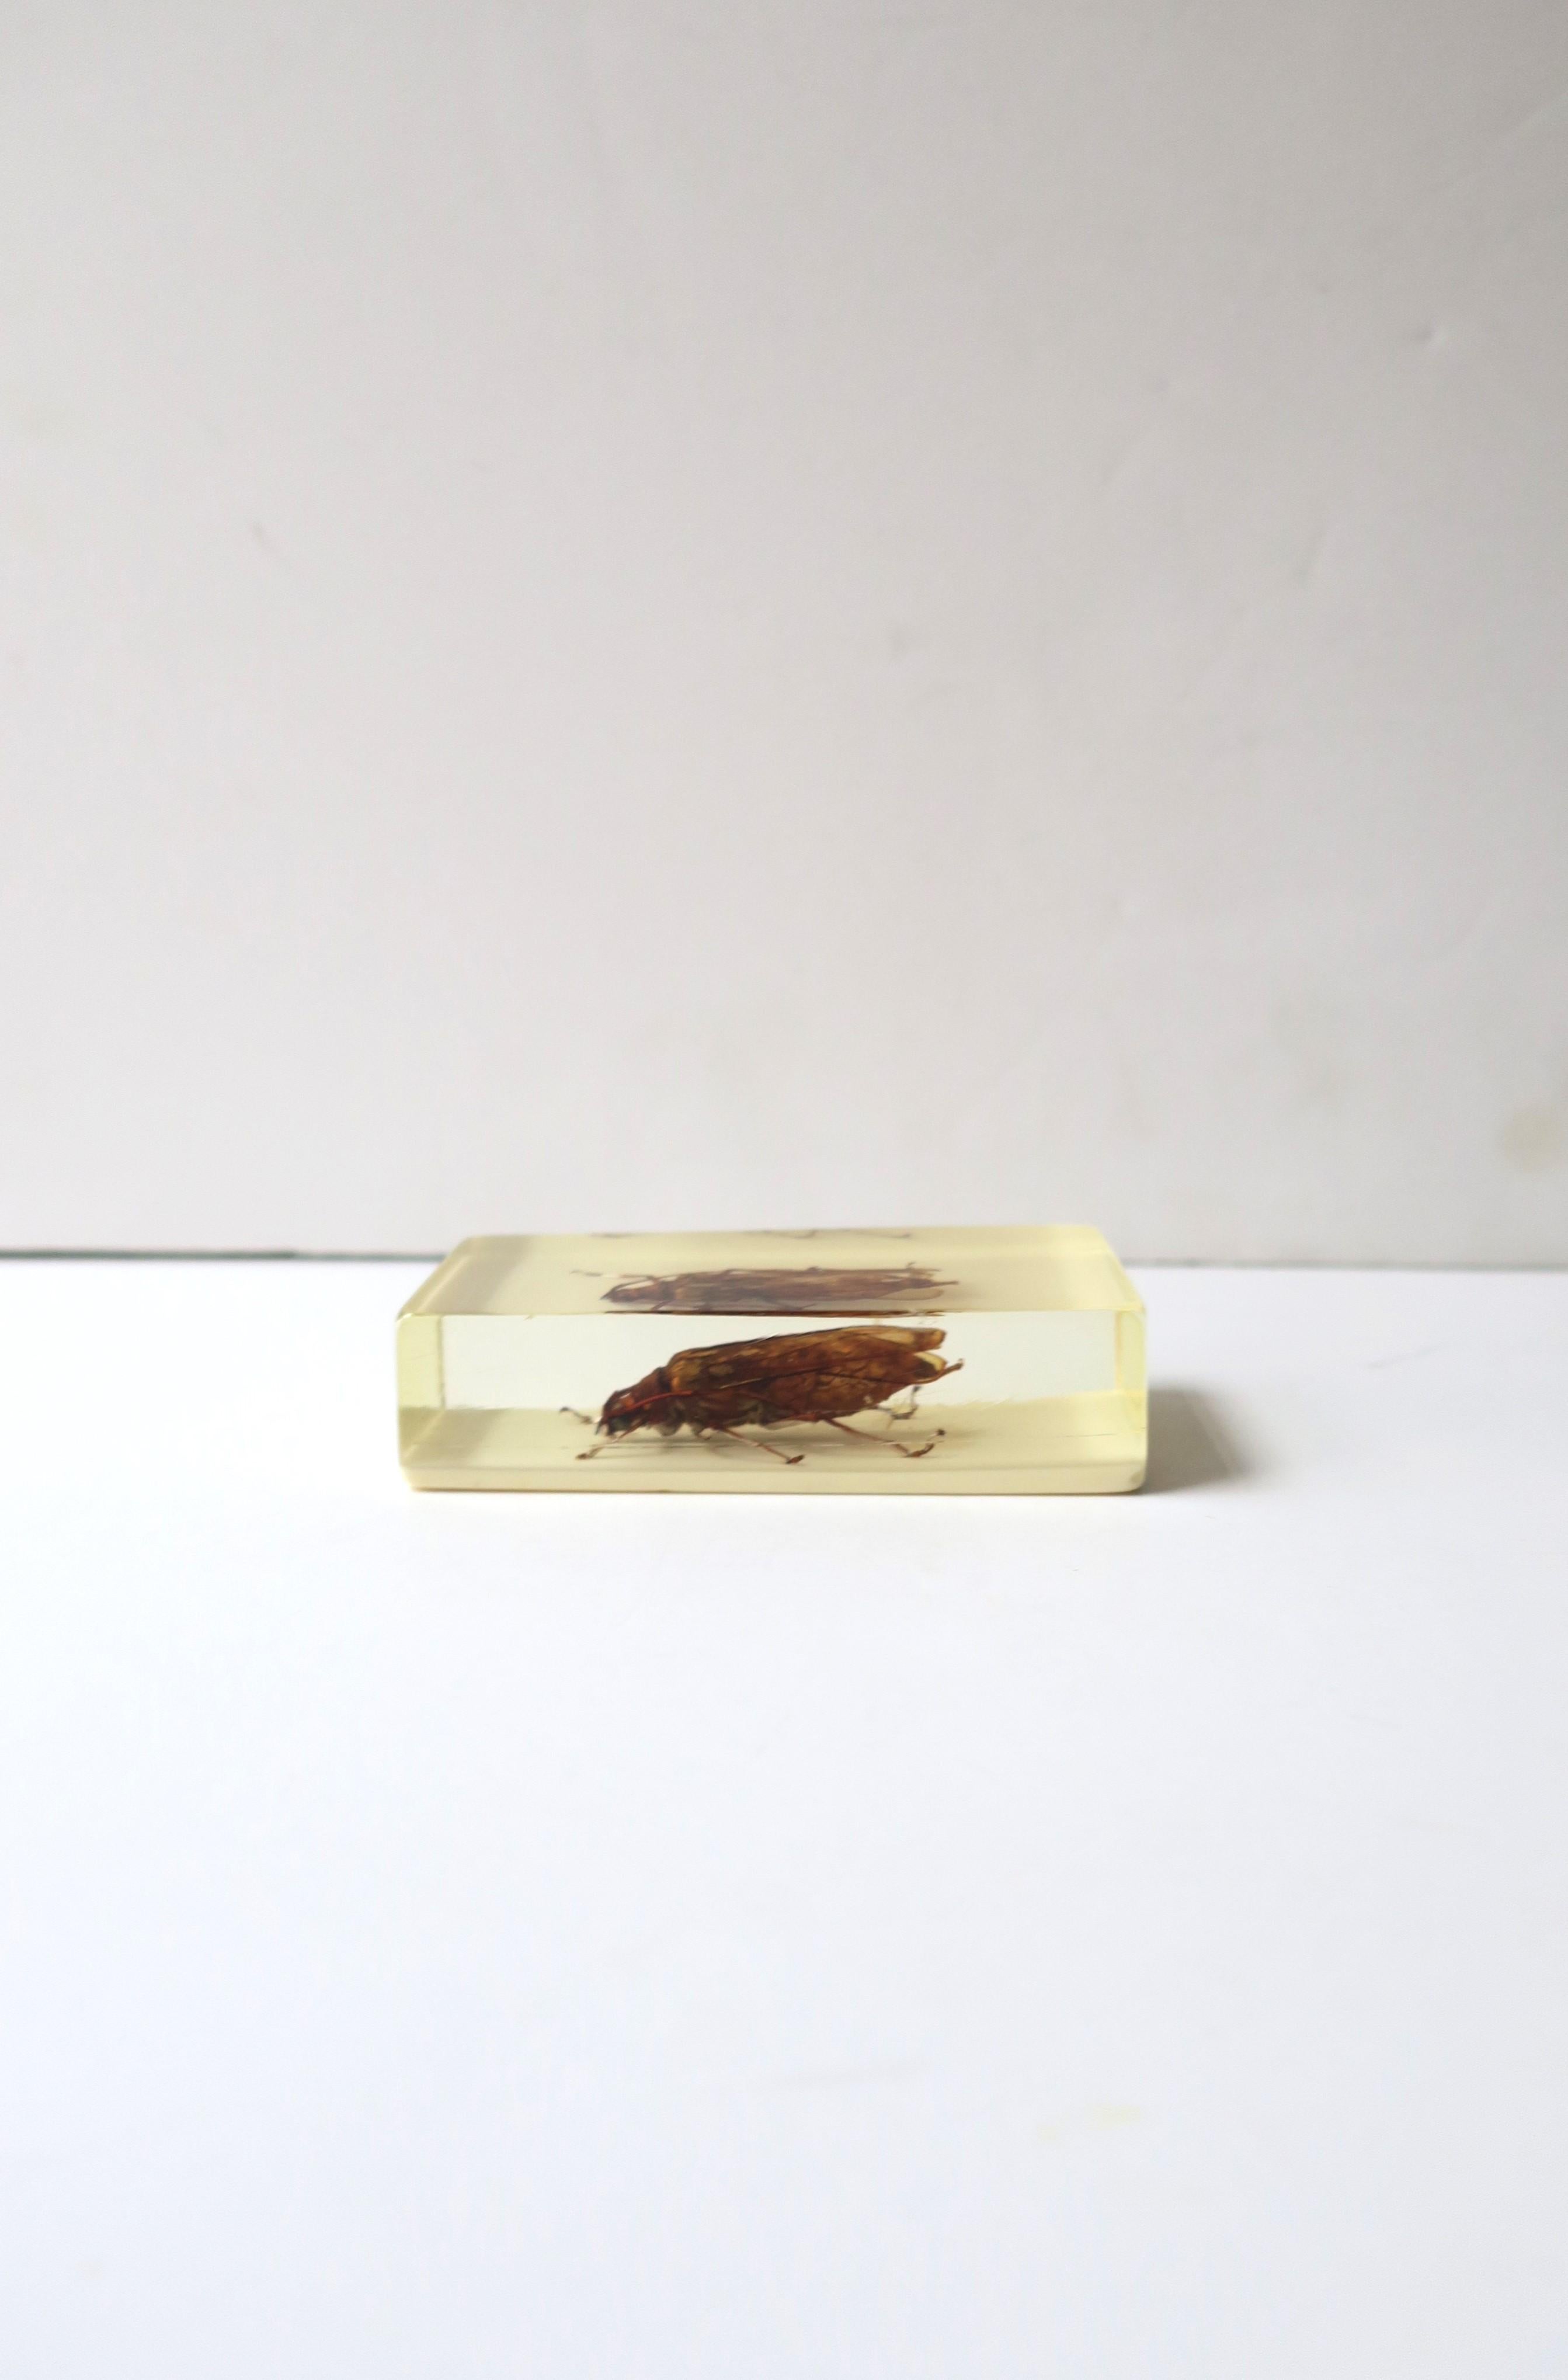 Lucite Encased Insect Bug Decorative Object or Paperweight For Sale 2